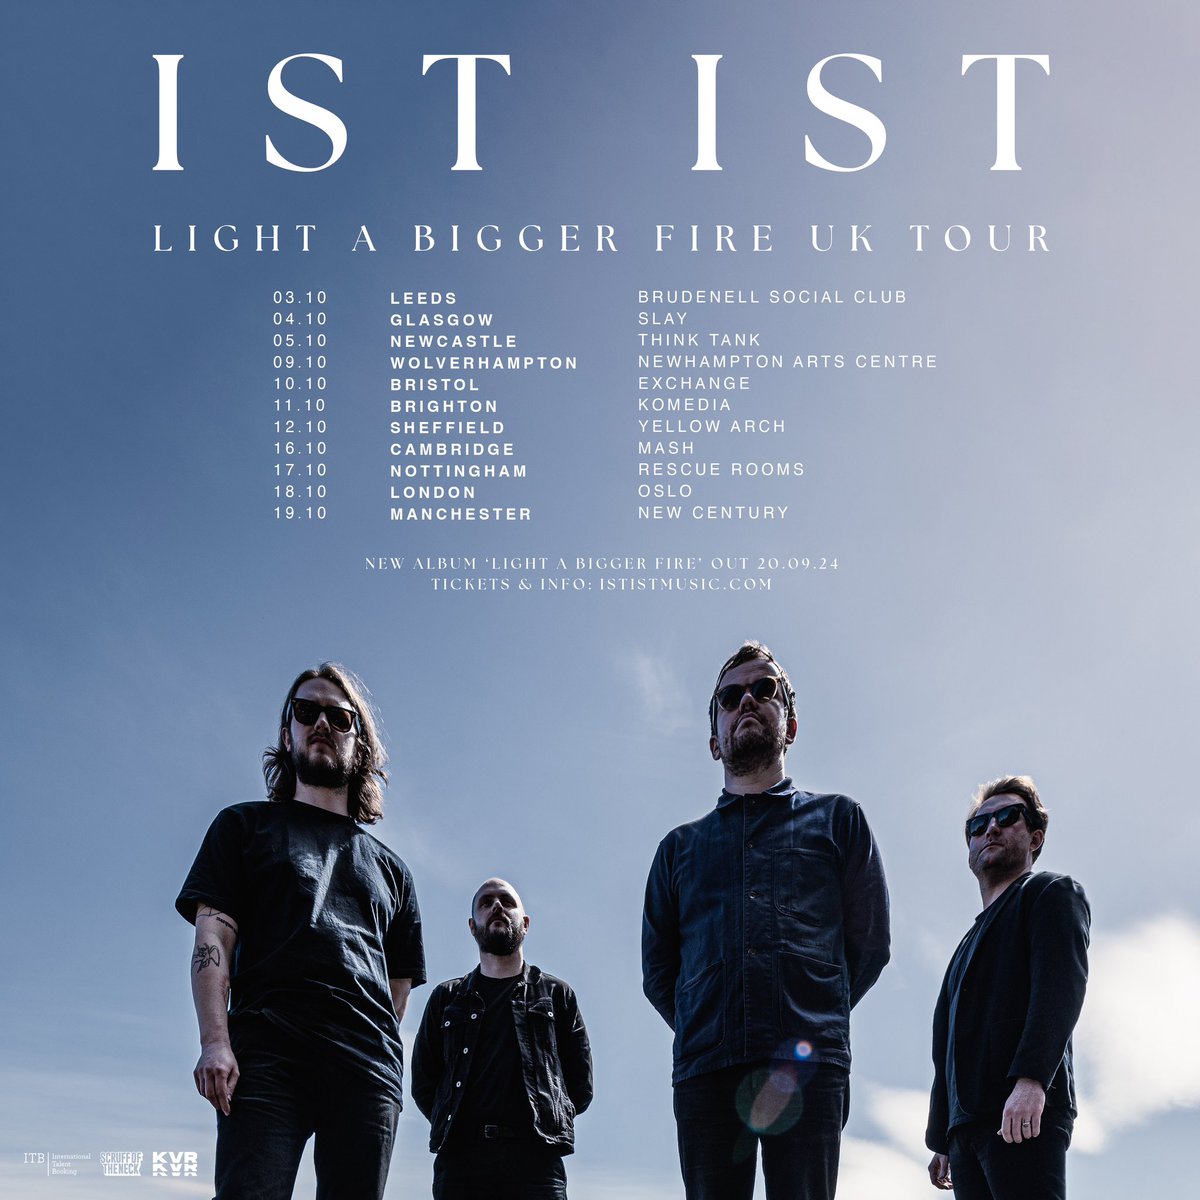 UK TOUR! We’re excited to hit the road in October and take our fourth record ‘Light A Bigger Fire’ for a spin around some familiar and new places. Pre-order the album by midnight on Tuesday to receive pre-sale access on Wednesday. General sale begins at 10:00 on Friday.